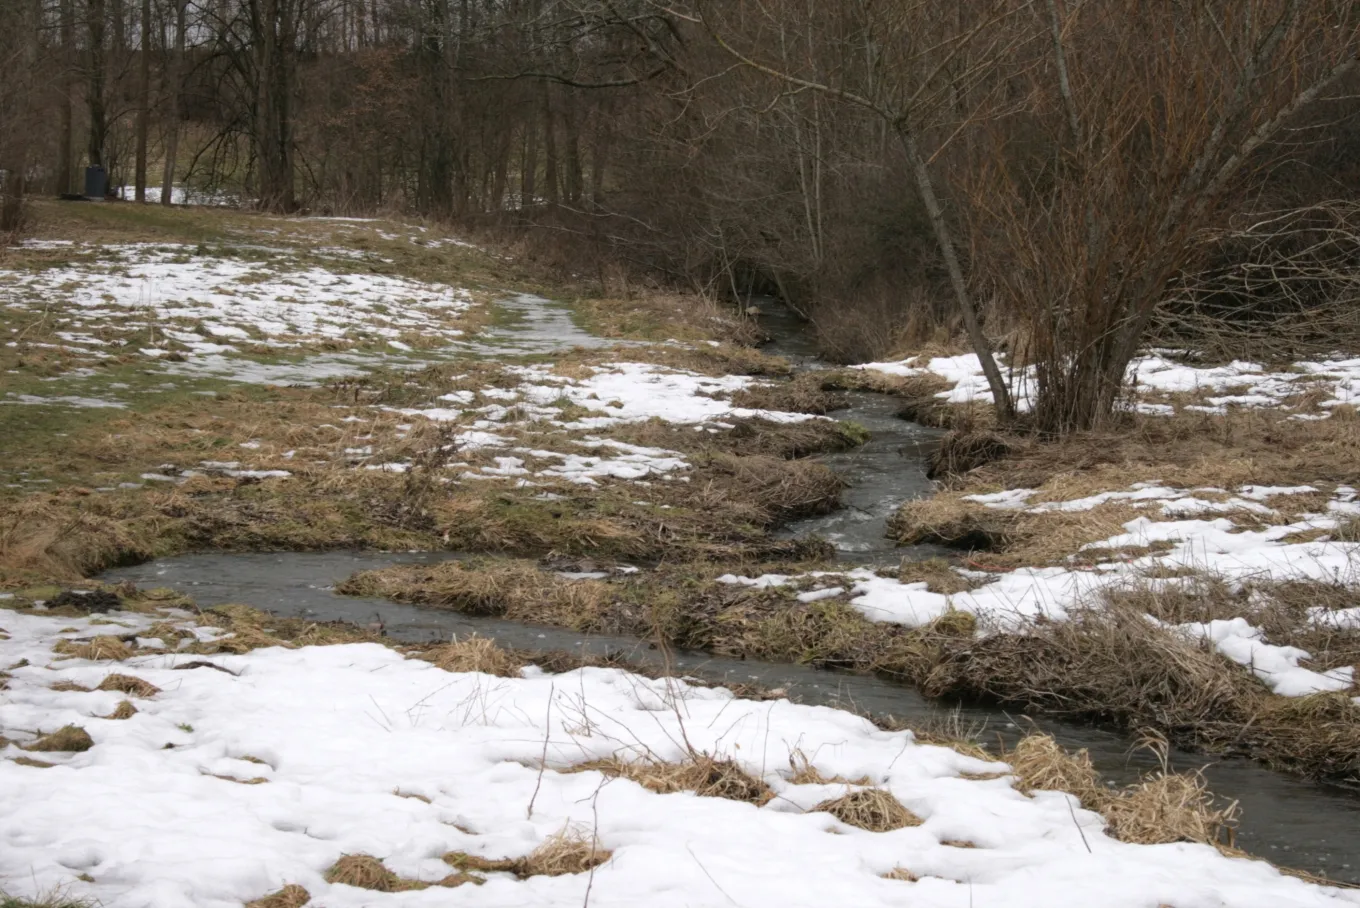 Photo showing: The small watercourse, "Hovedgrøften", near its mouth into river Giber Å north of Beder, Denmark.